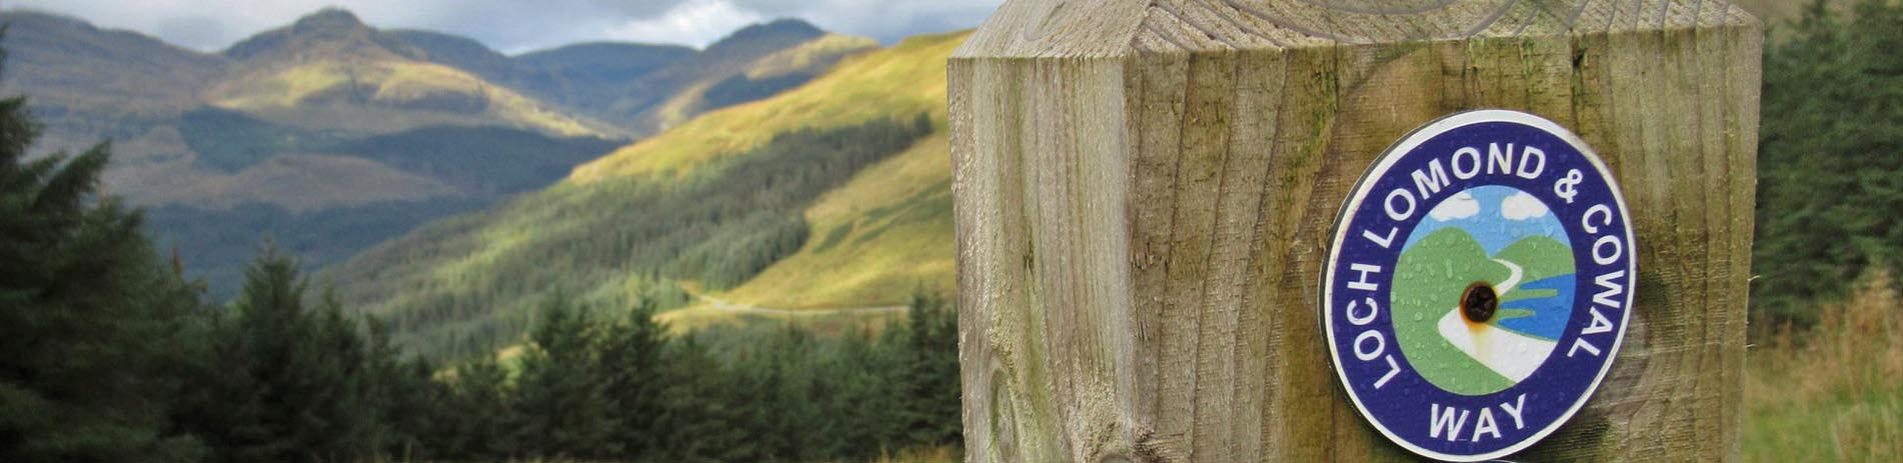 loch-lomond-and-cowal-way-sign-on-wooden-post-with-mountains-and-coniferous-forests-in-the-background